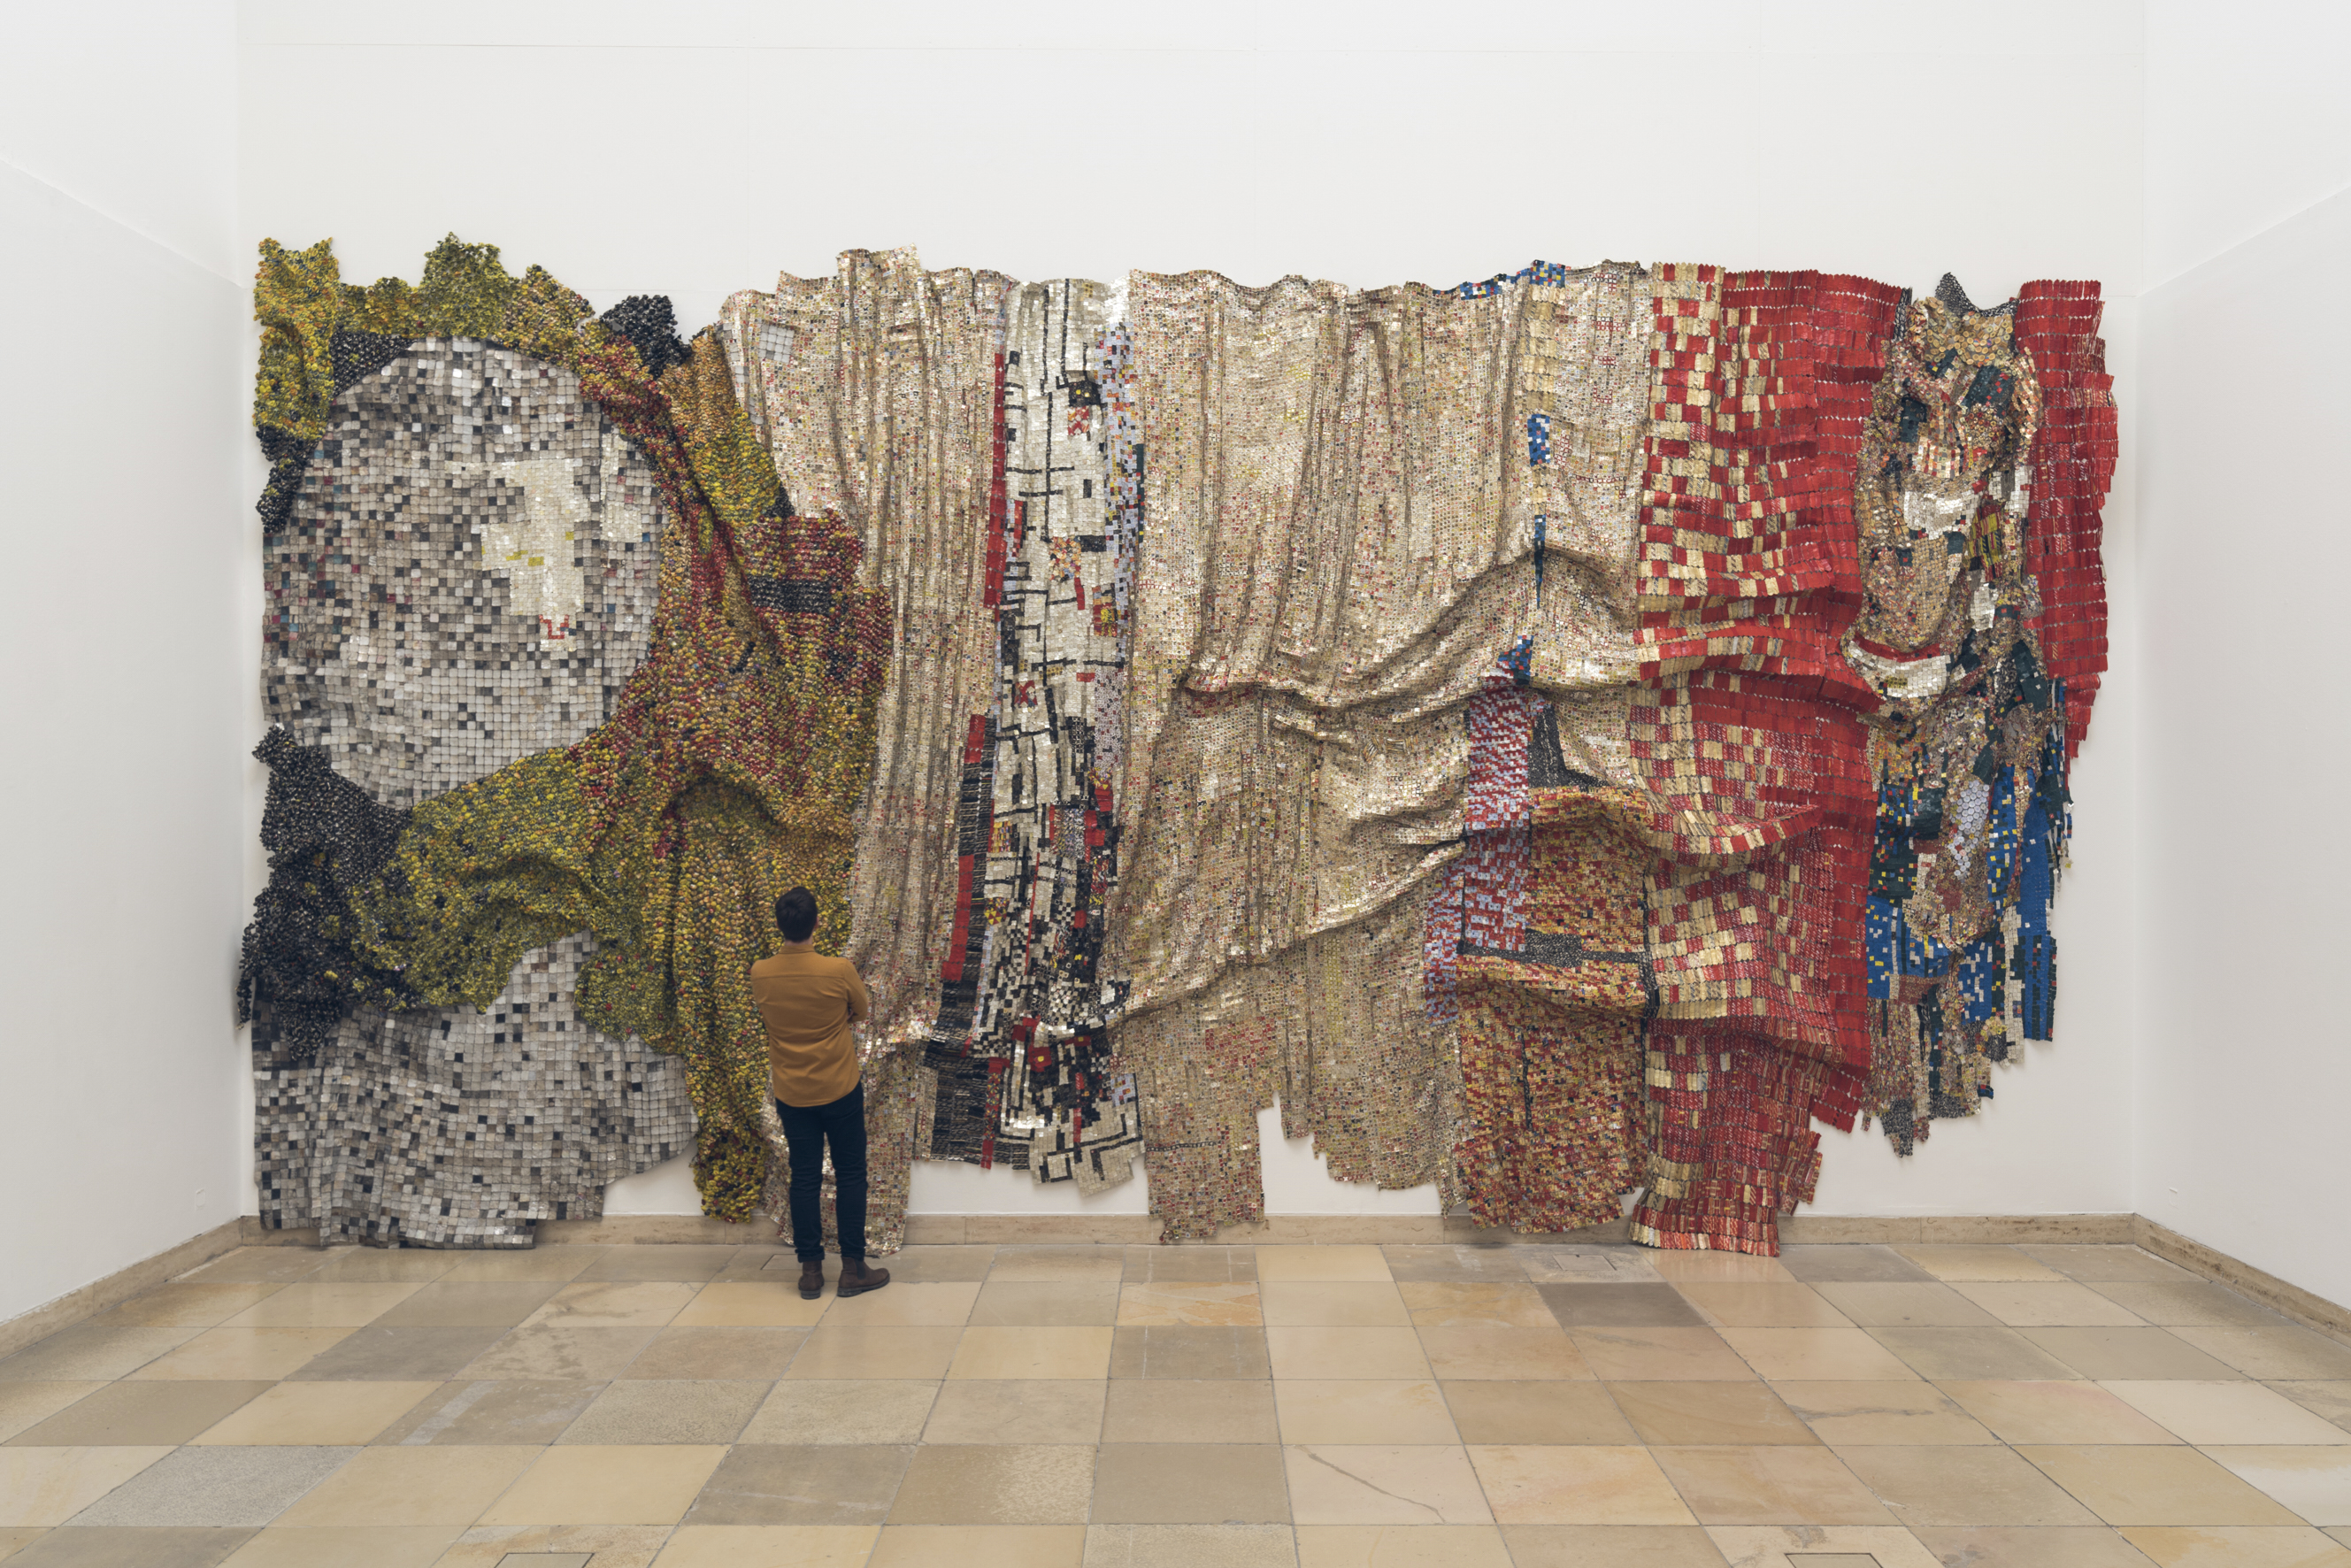 El Anatsui "In the World But Do not Know the World", 2019, installation view, Haus der Kunst. Photo: Maximilian Geuter